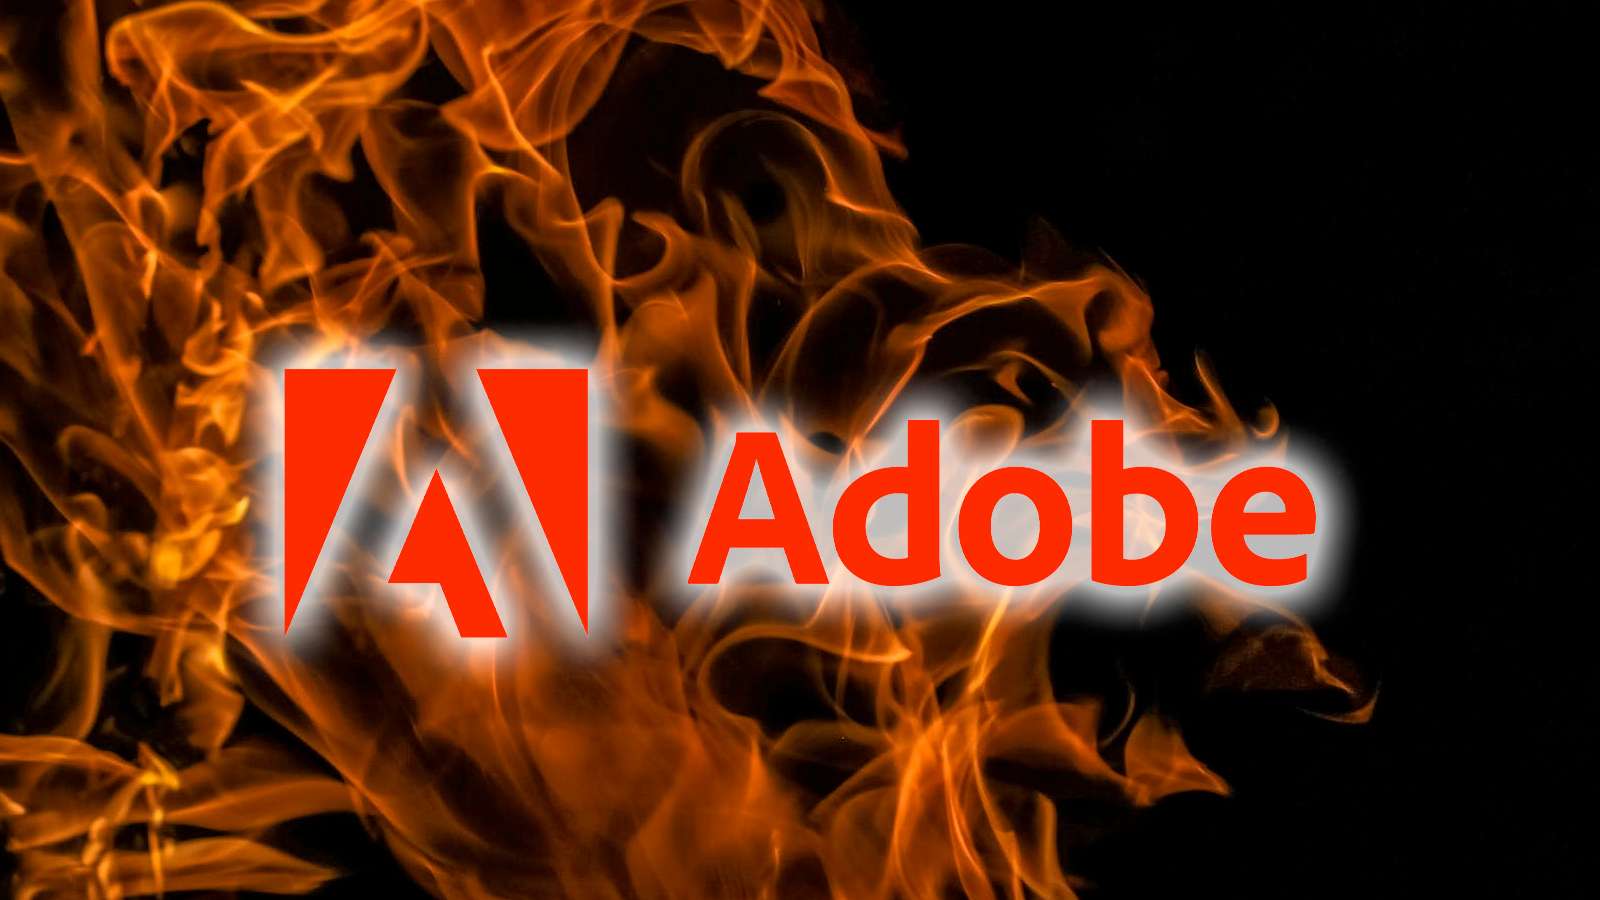 Adobe logo with fire behind it